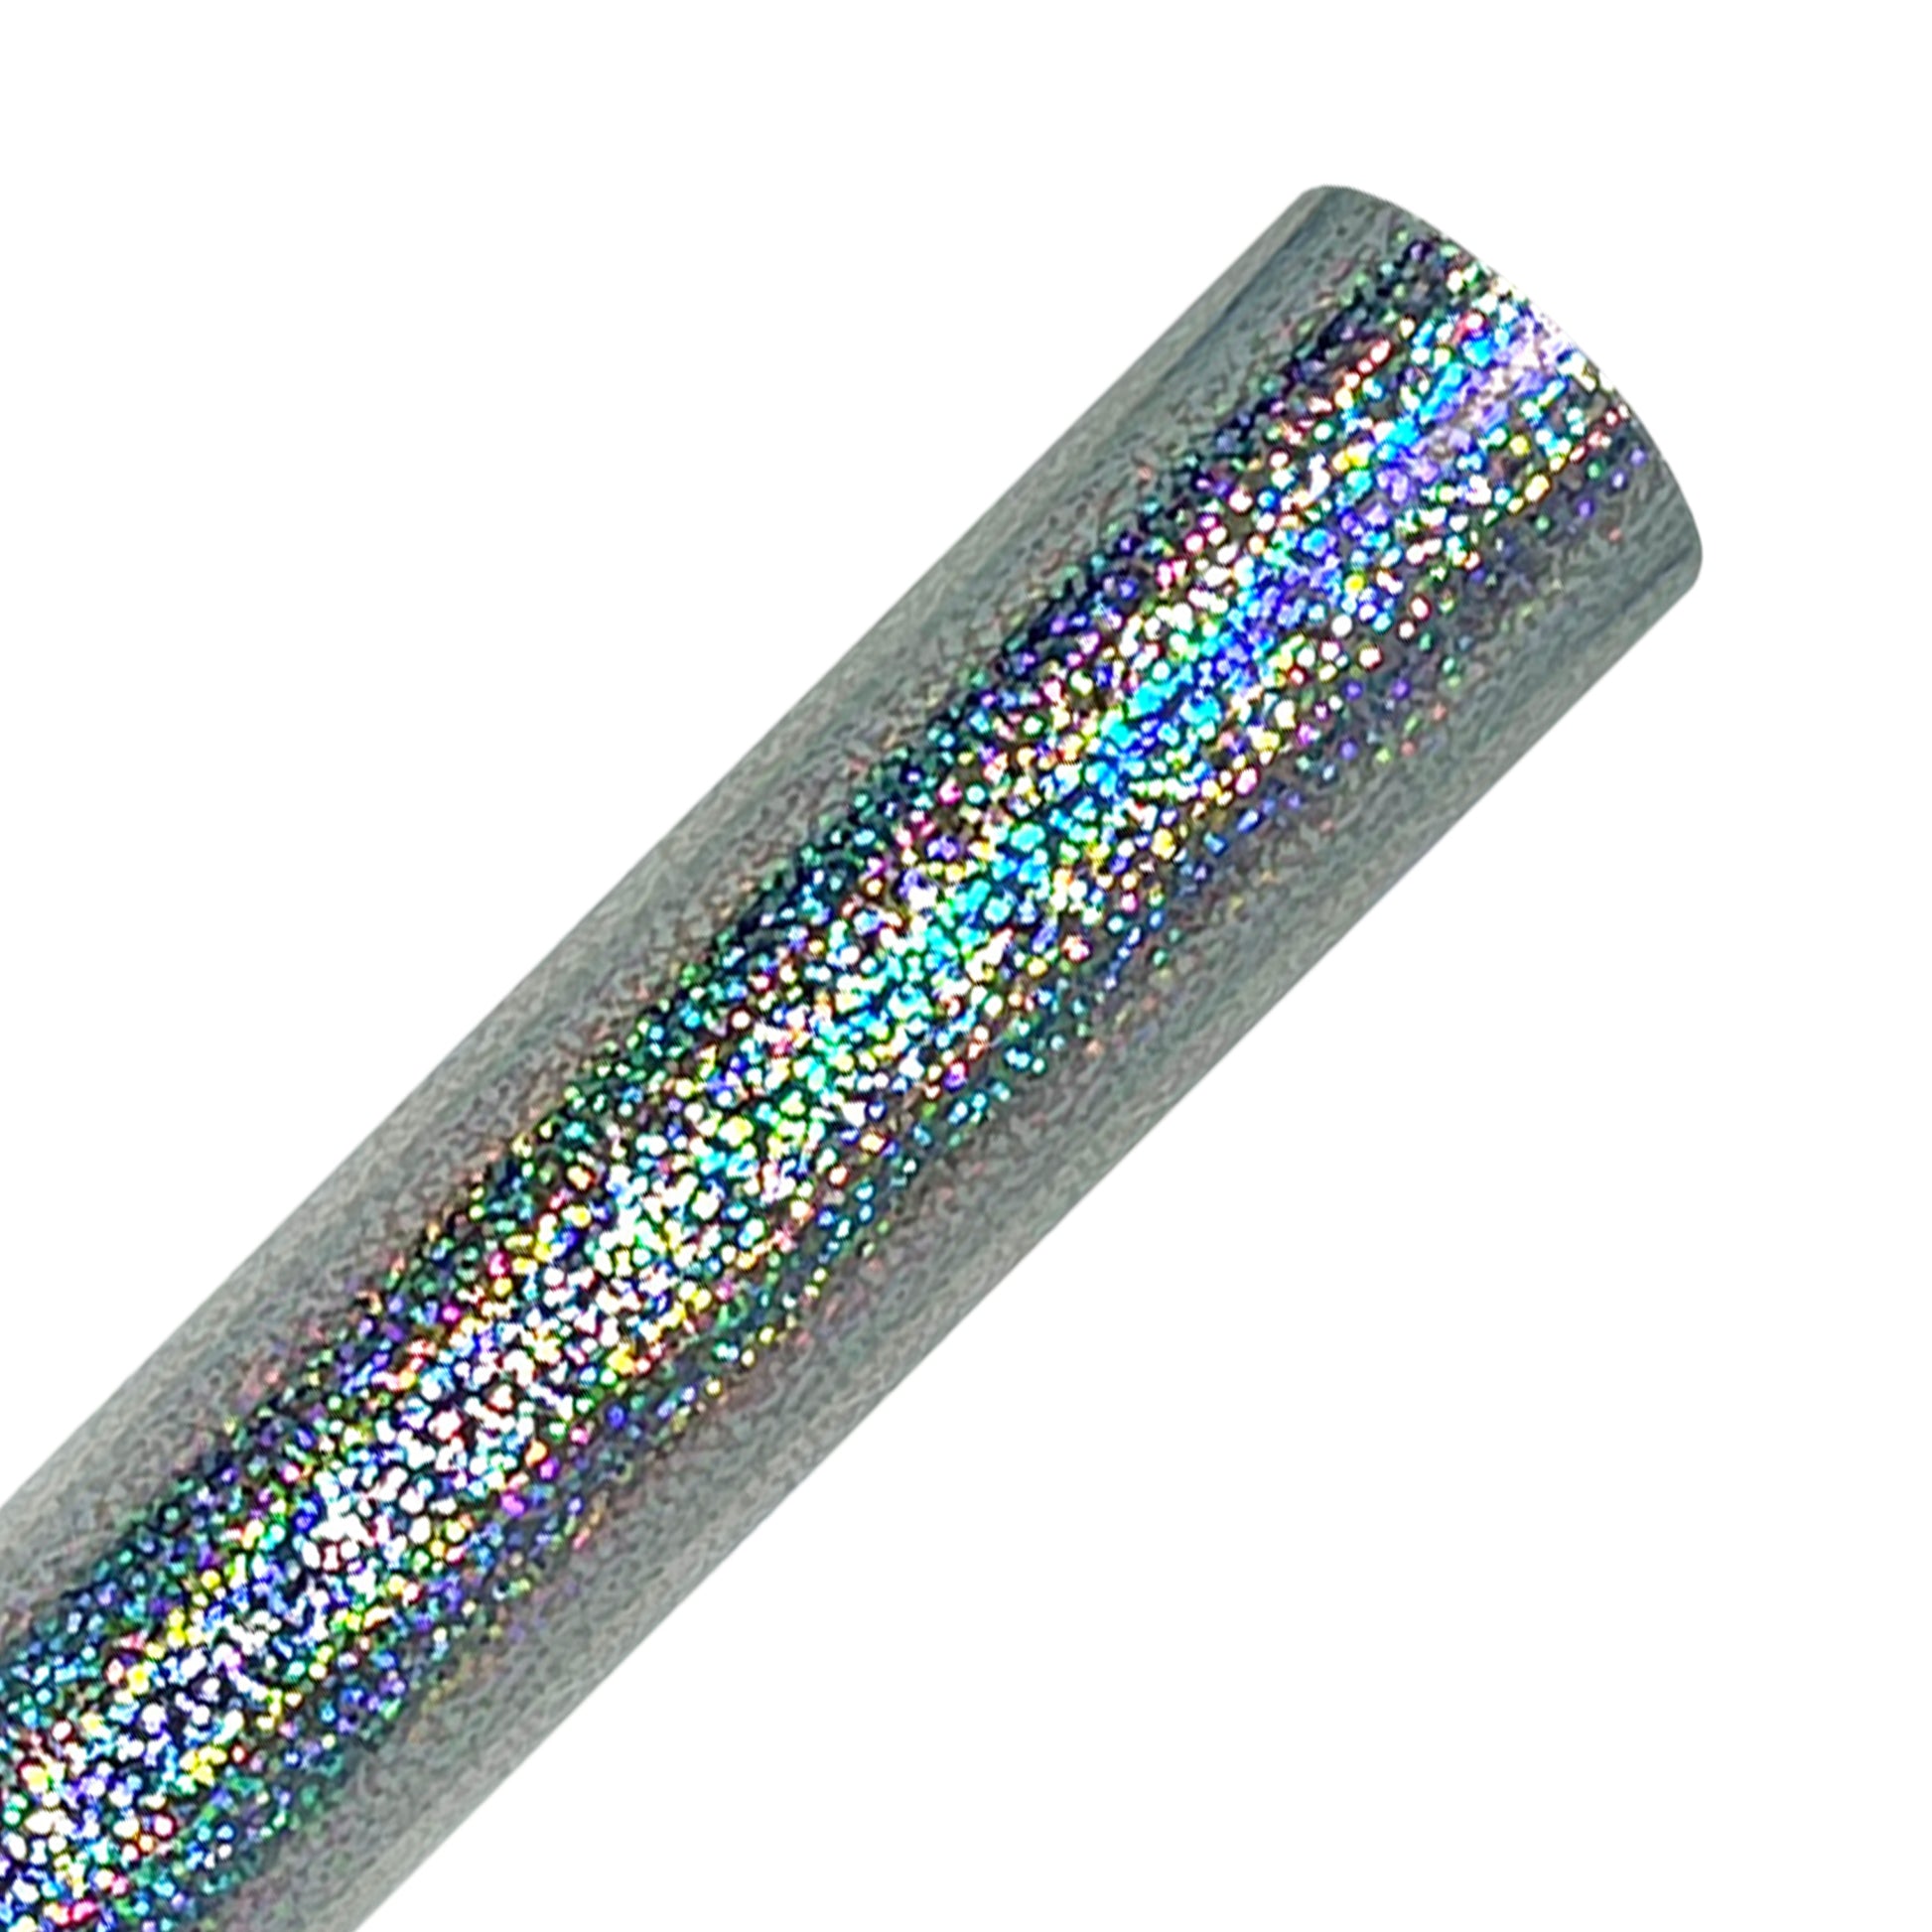 Silver Chrome Chrome Adhesive Vinyl Rolls By Craftables – shopcraftables